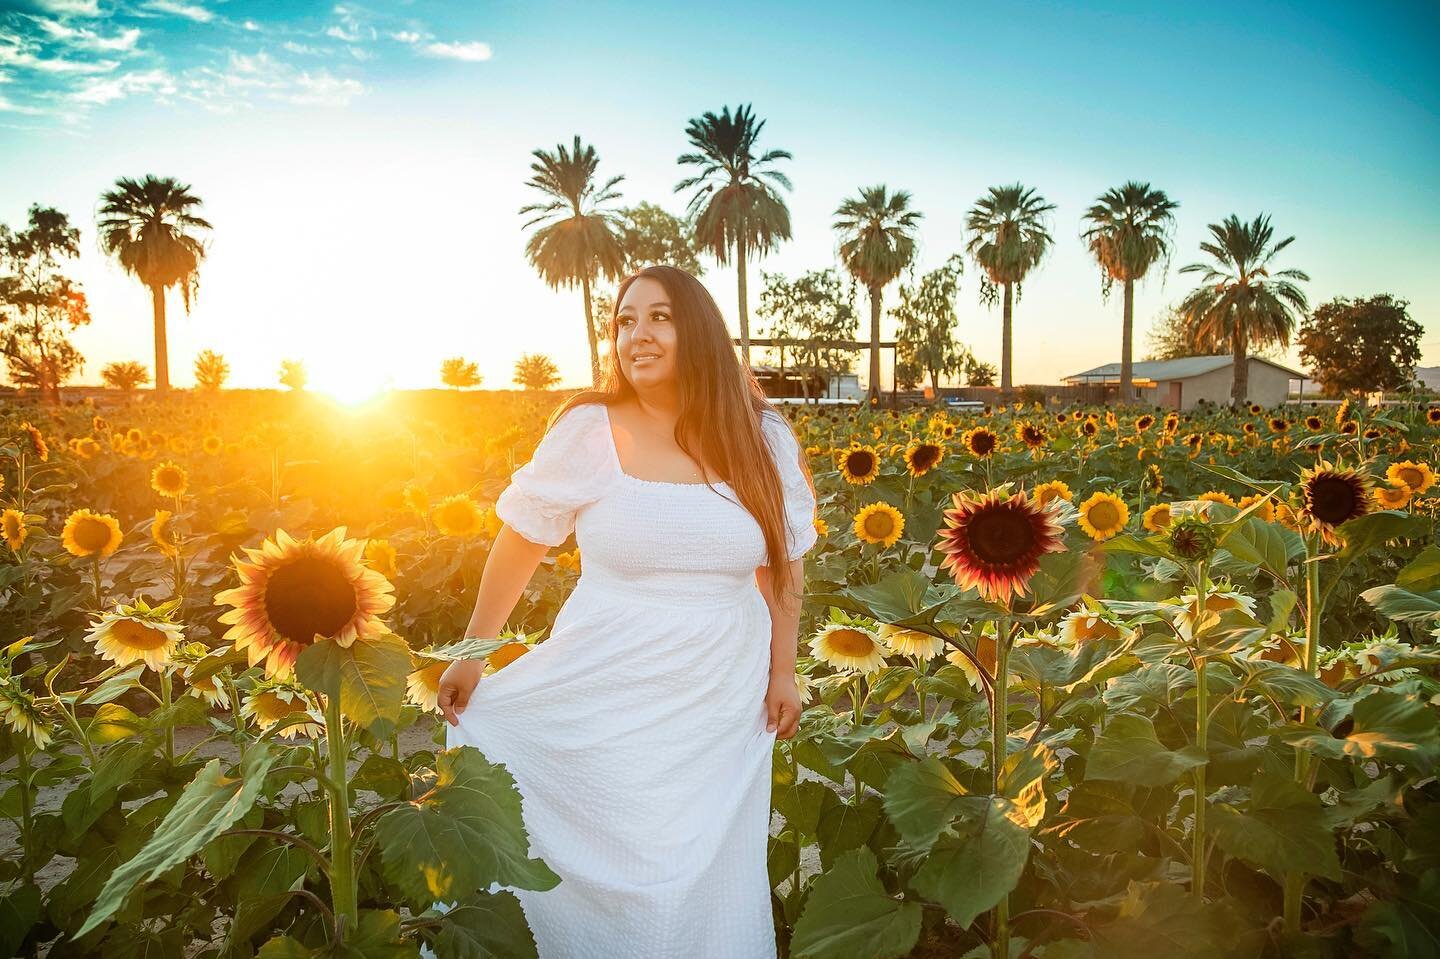 In October, I went to sunflower fields in Buckeye A LOT. In November, I edited photos A LOT. I got new editing software after just wanting a certain look and not being able to get it, and after realizing there are AI editing products out there that c